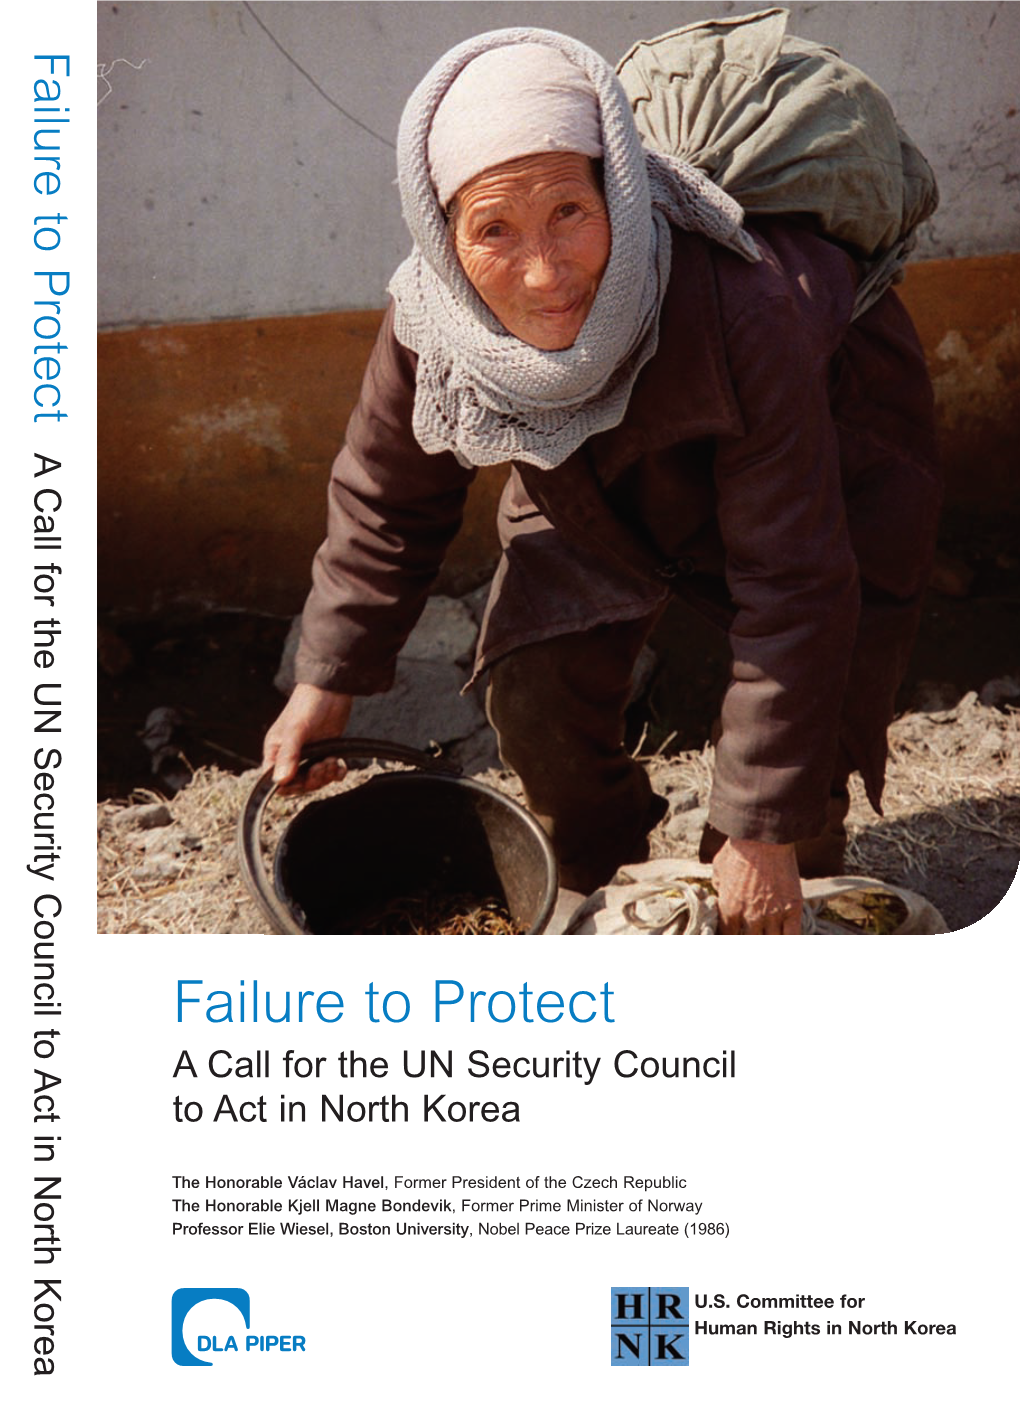 Failure to Protect: a Call for the UN Security Council to Act in North Korea